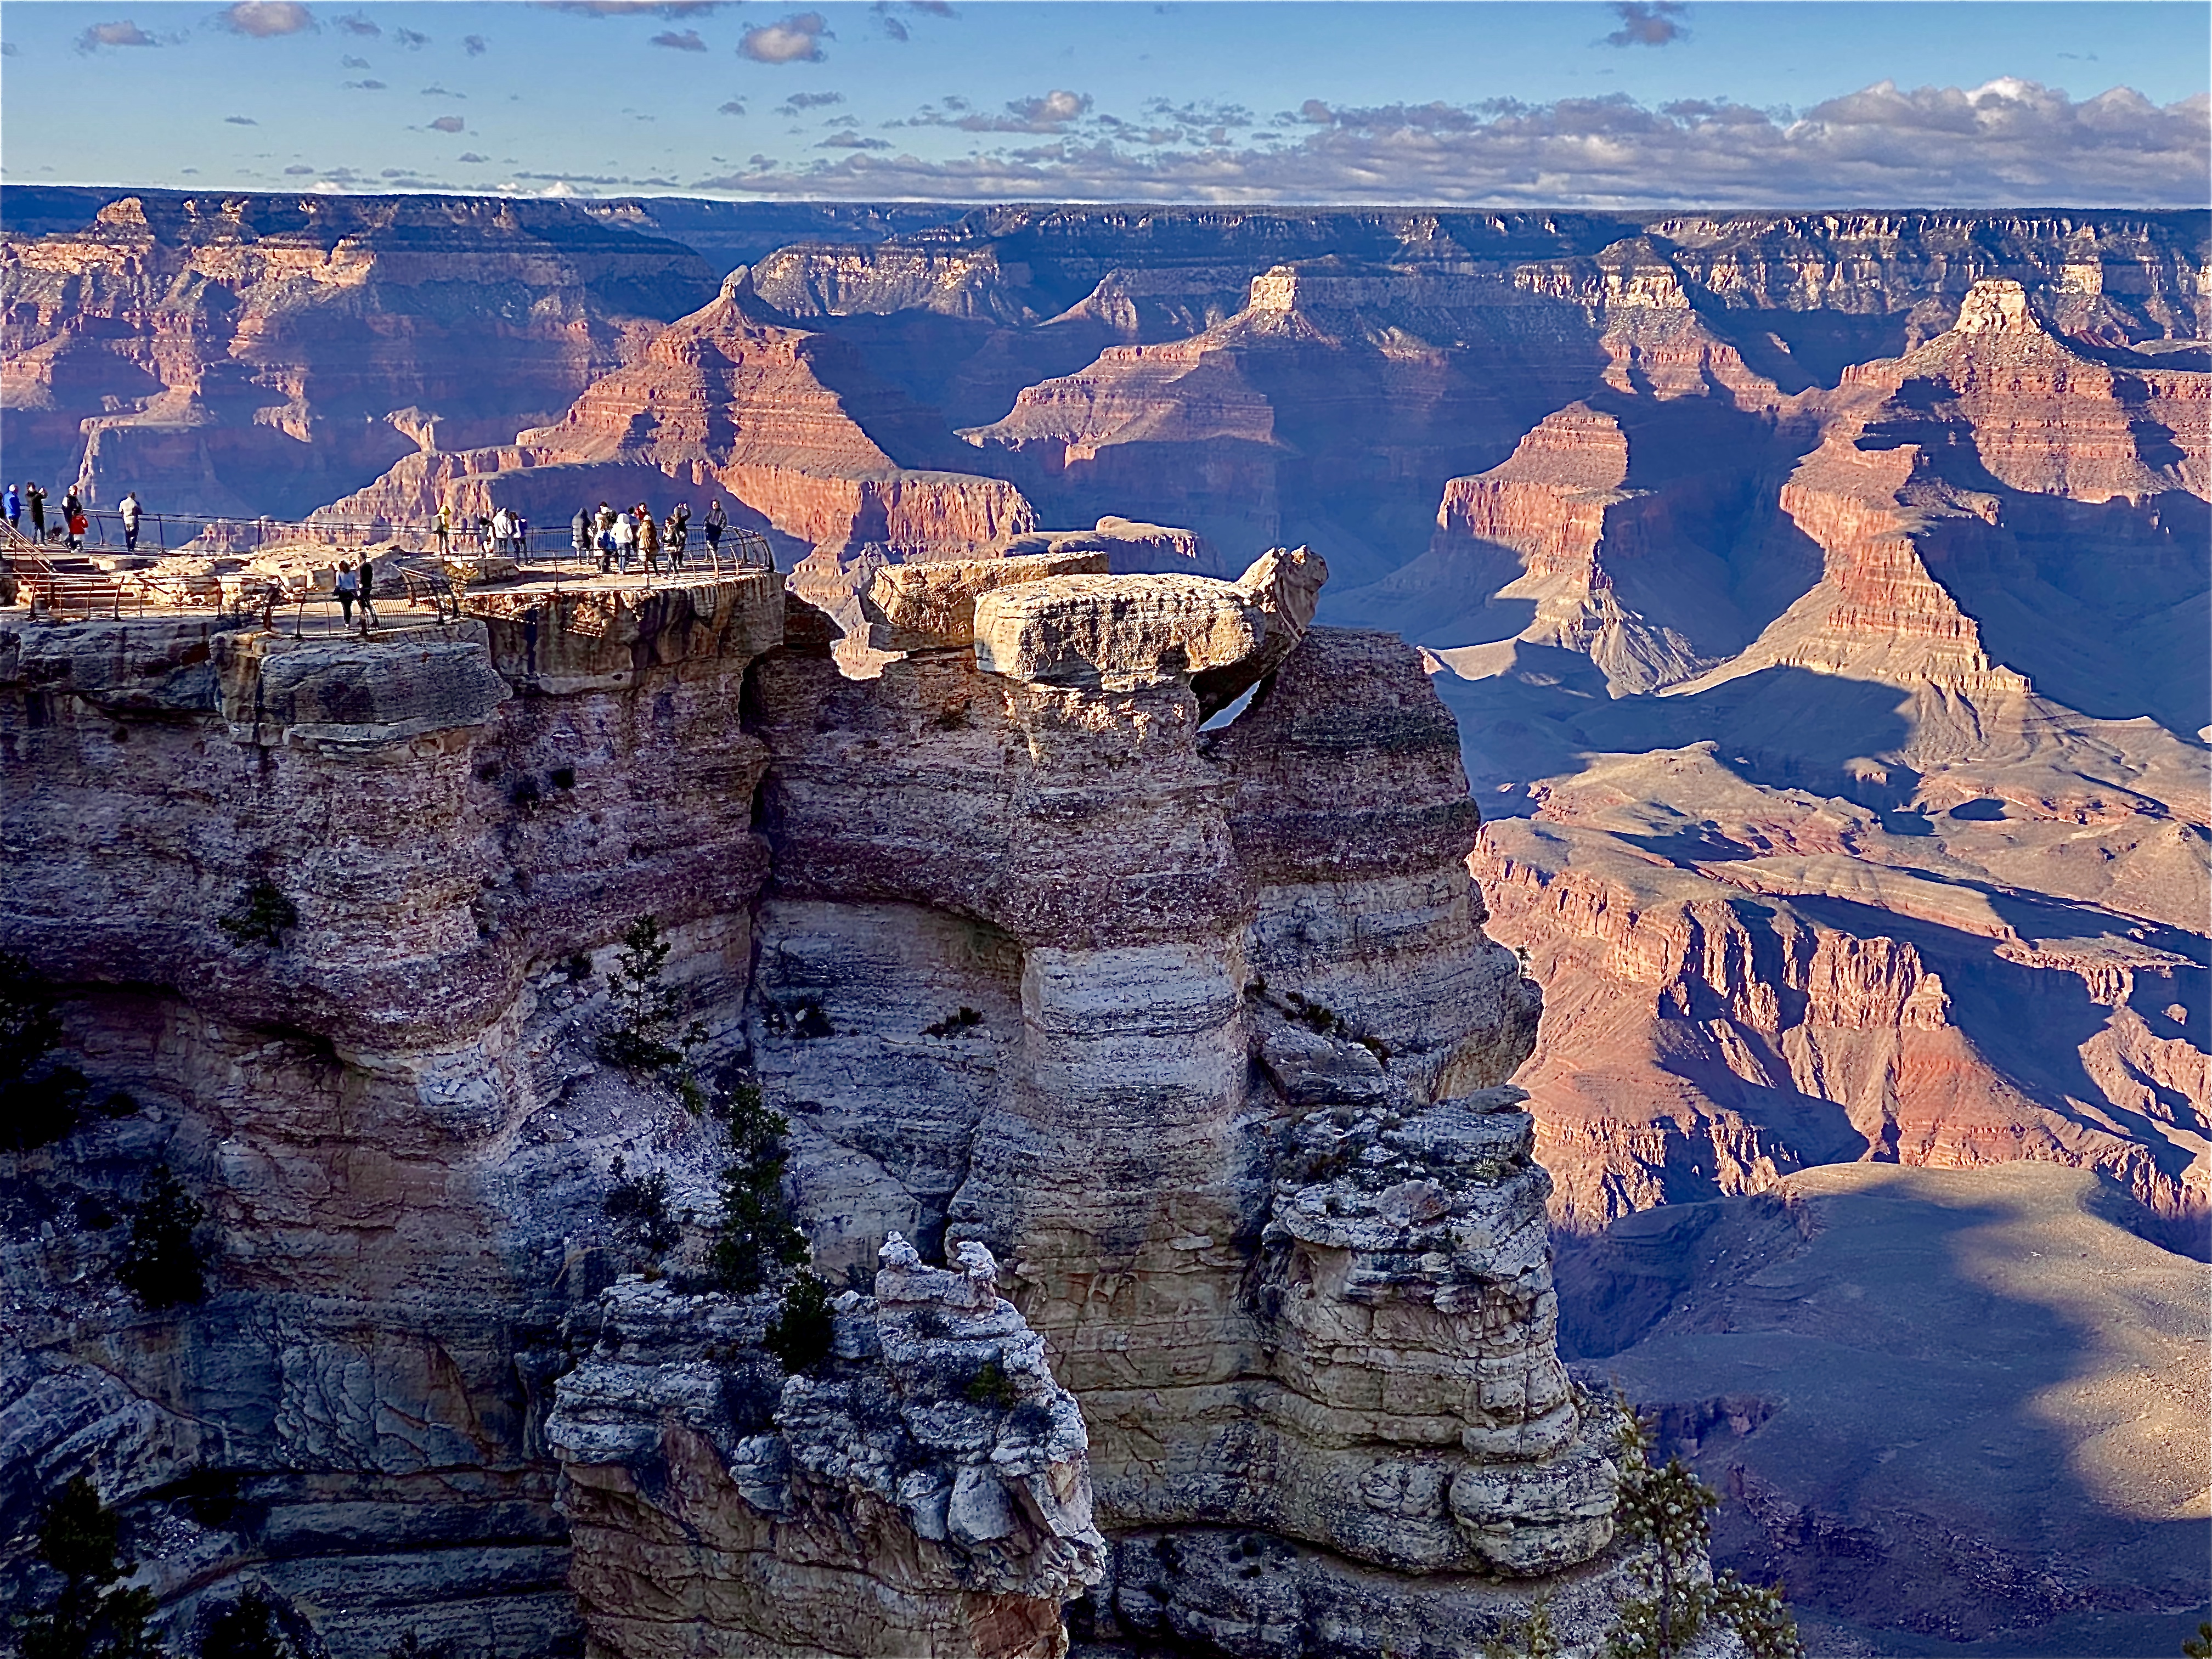 1-Day Grand Canyon National Park Tour from Las Vegas with Lunch